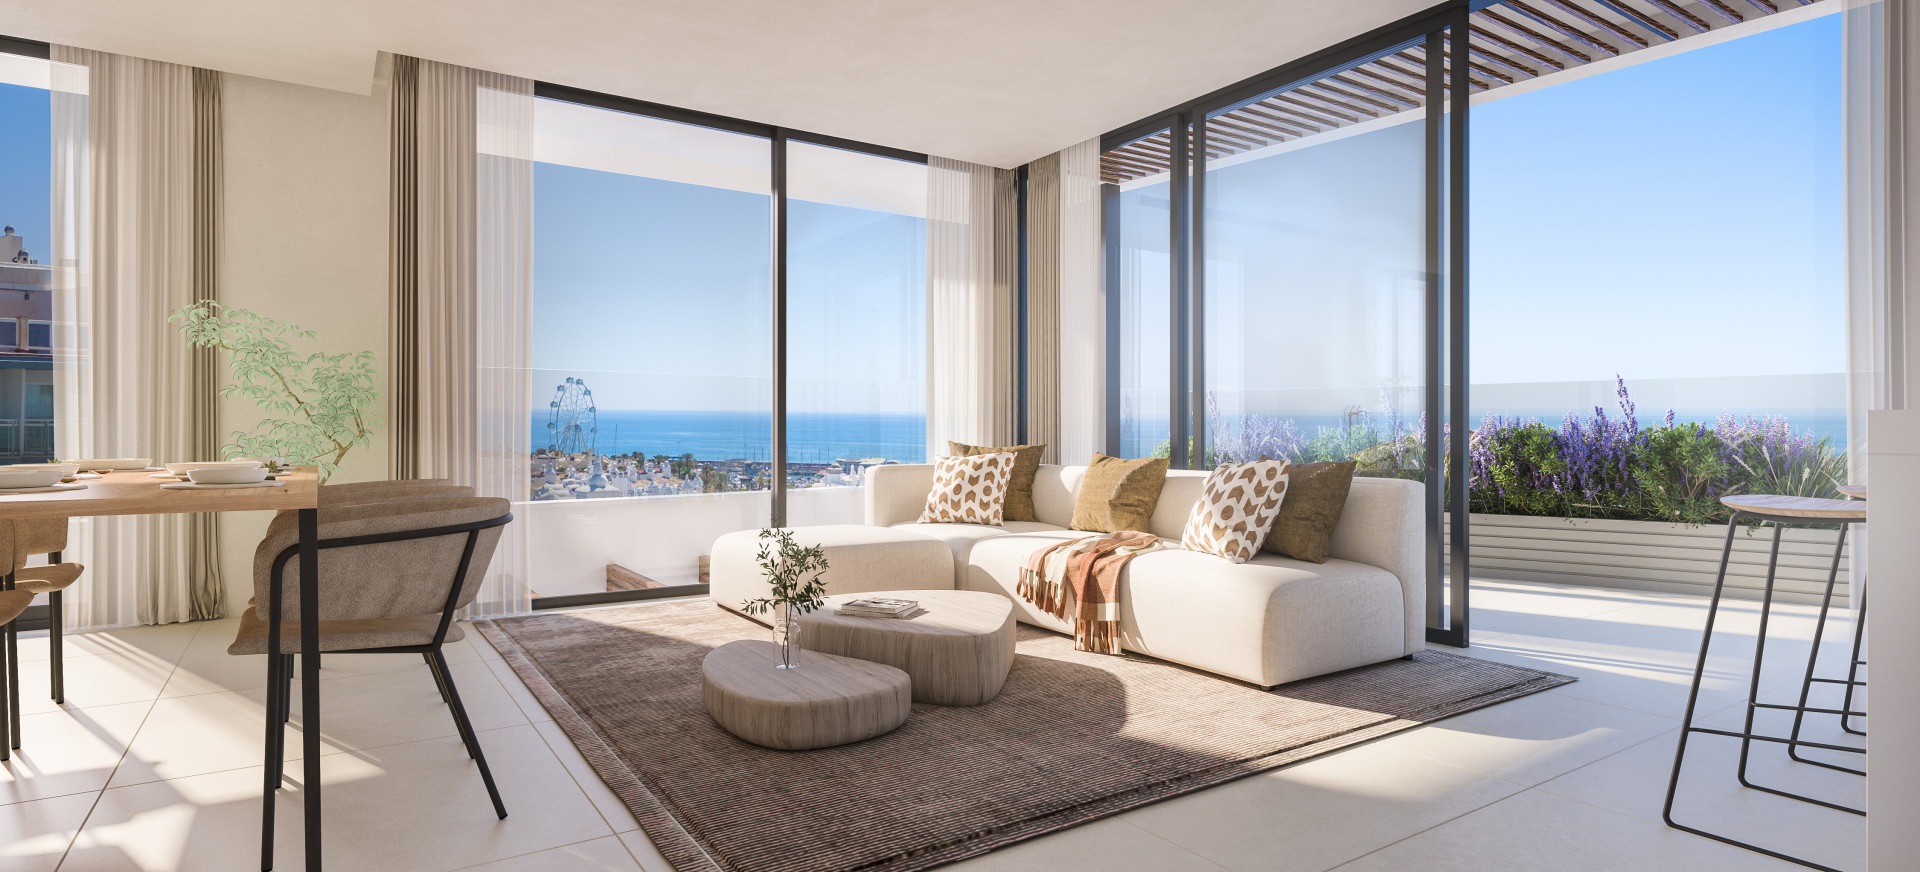 Marina Golden Bay: Two and three bedroom homes next to the port of Benalmádena. | Image 6